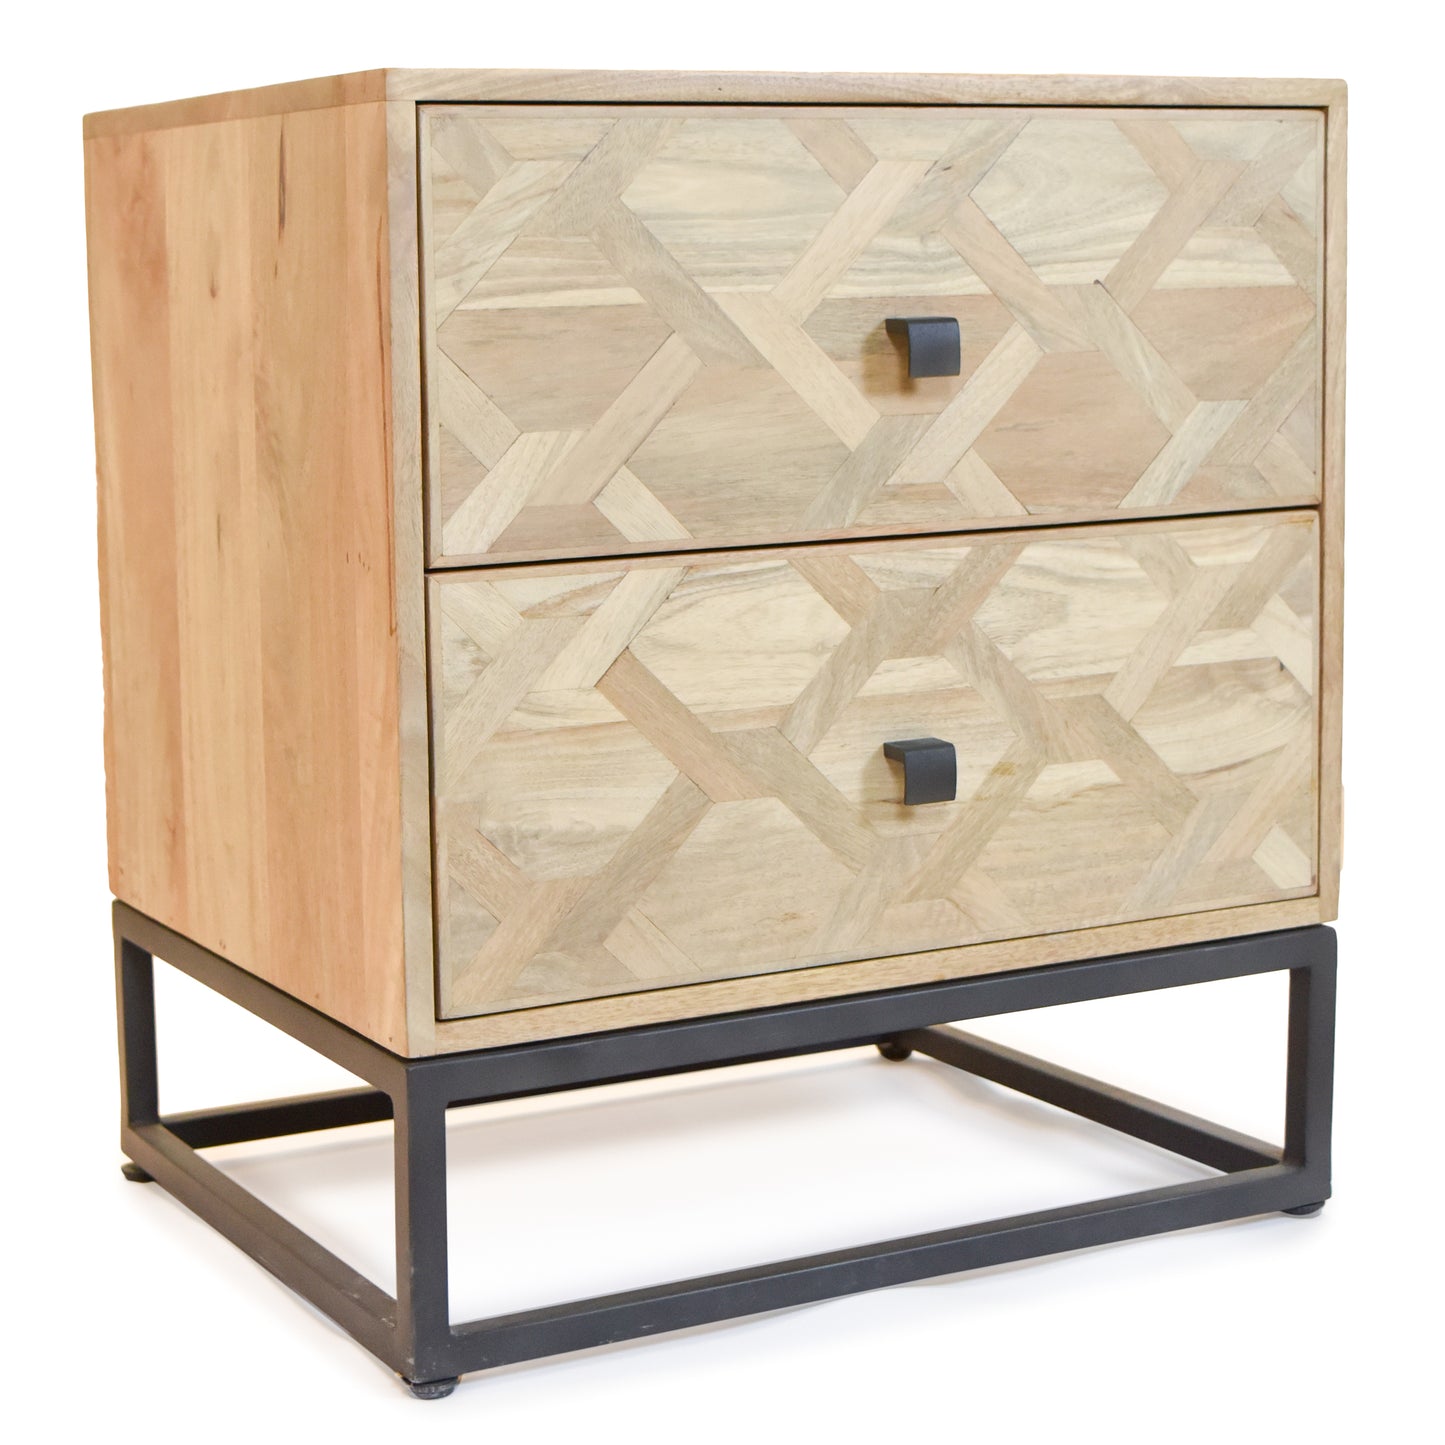 Functional Style: The 2-Drawer Bedside Table by HomenEarth